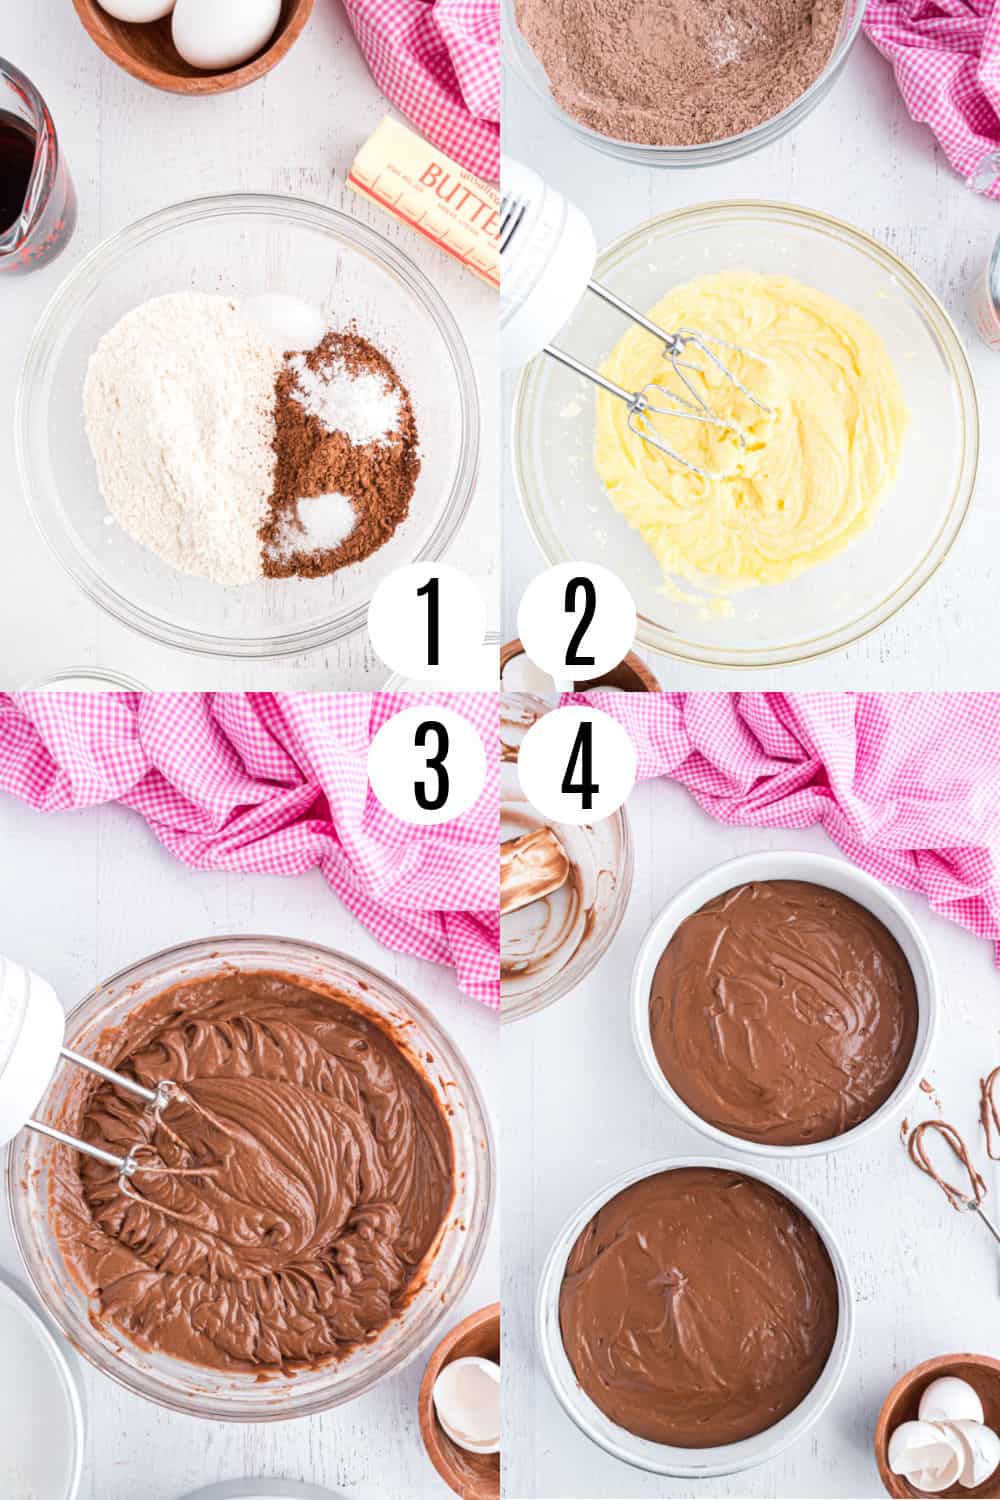 Step by step photos showing how to make a chocolate cake.